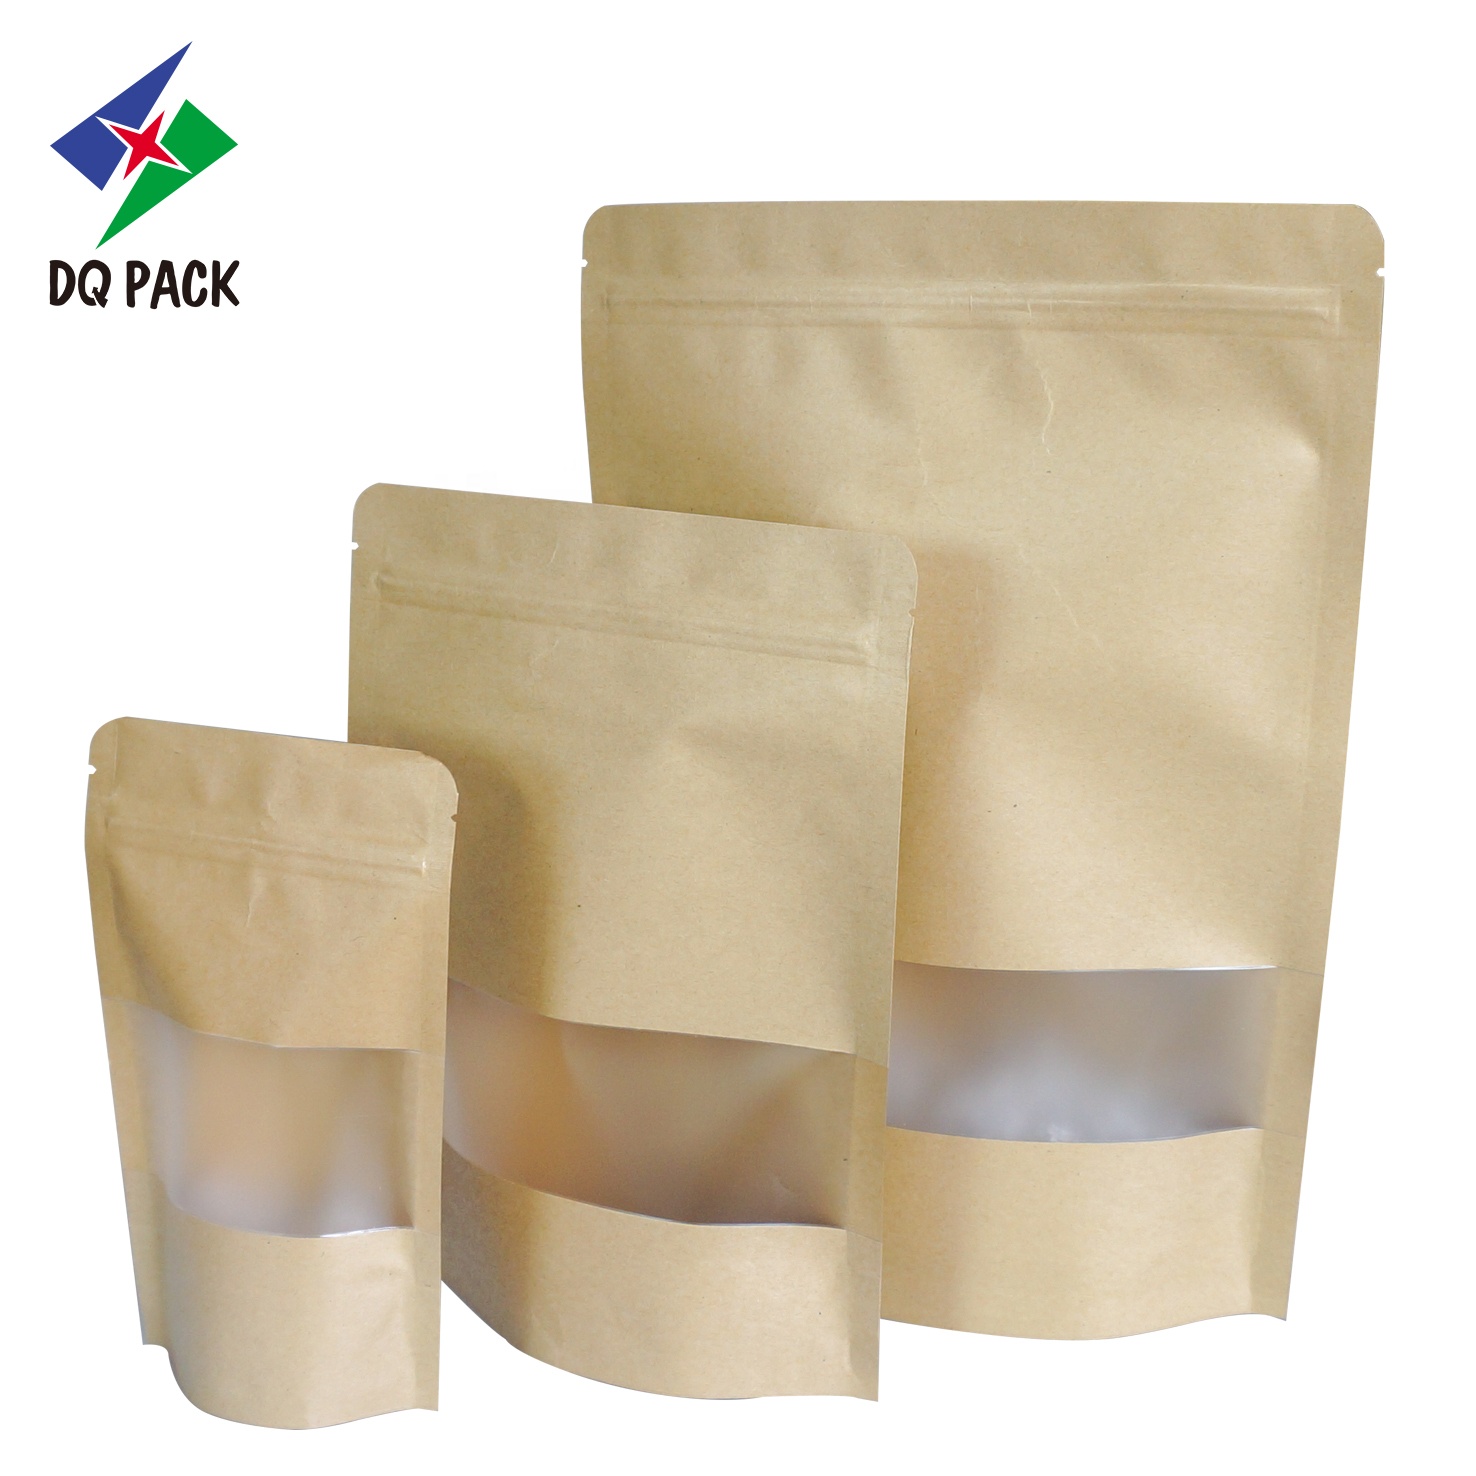 DQ PACK Wholesale Resealable Kraft Paper Pouch Stand up pouch with zipper for dried food snack packaging